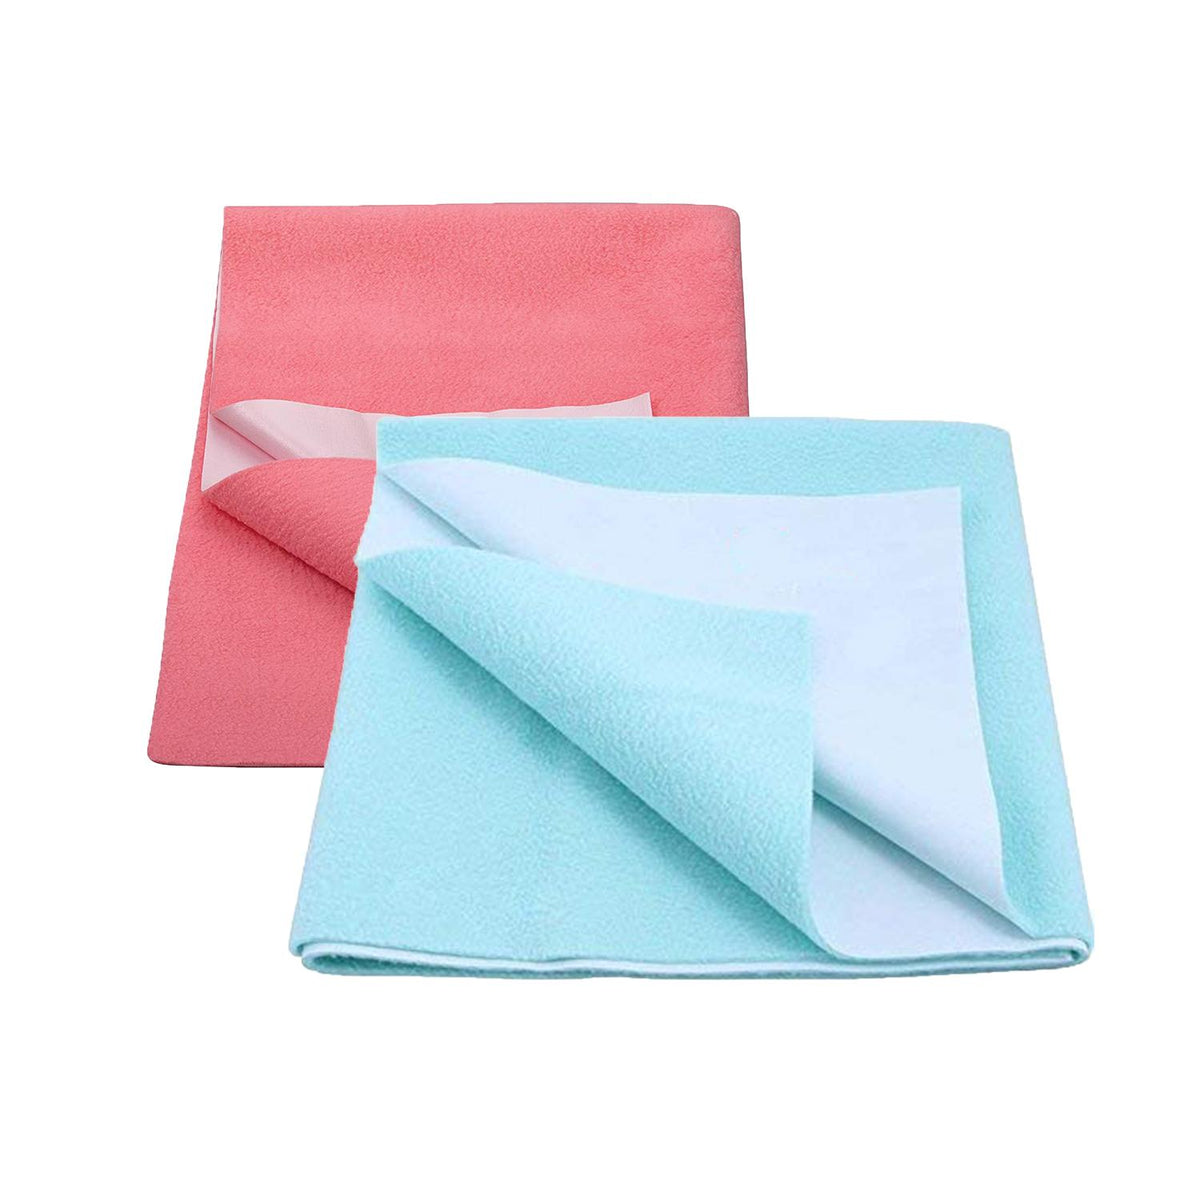 Baby Waterproof Protector Dry Sheet for new born - Medium- Pack of 2 ( 70x100 cm ) Pink and Blue